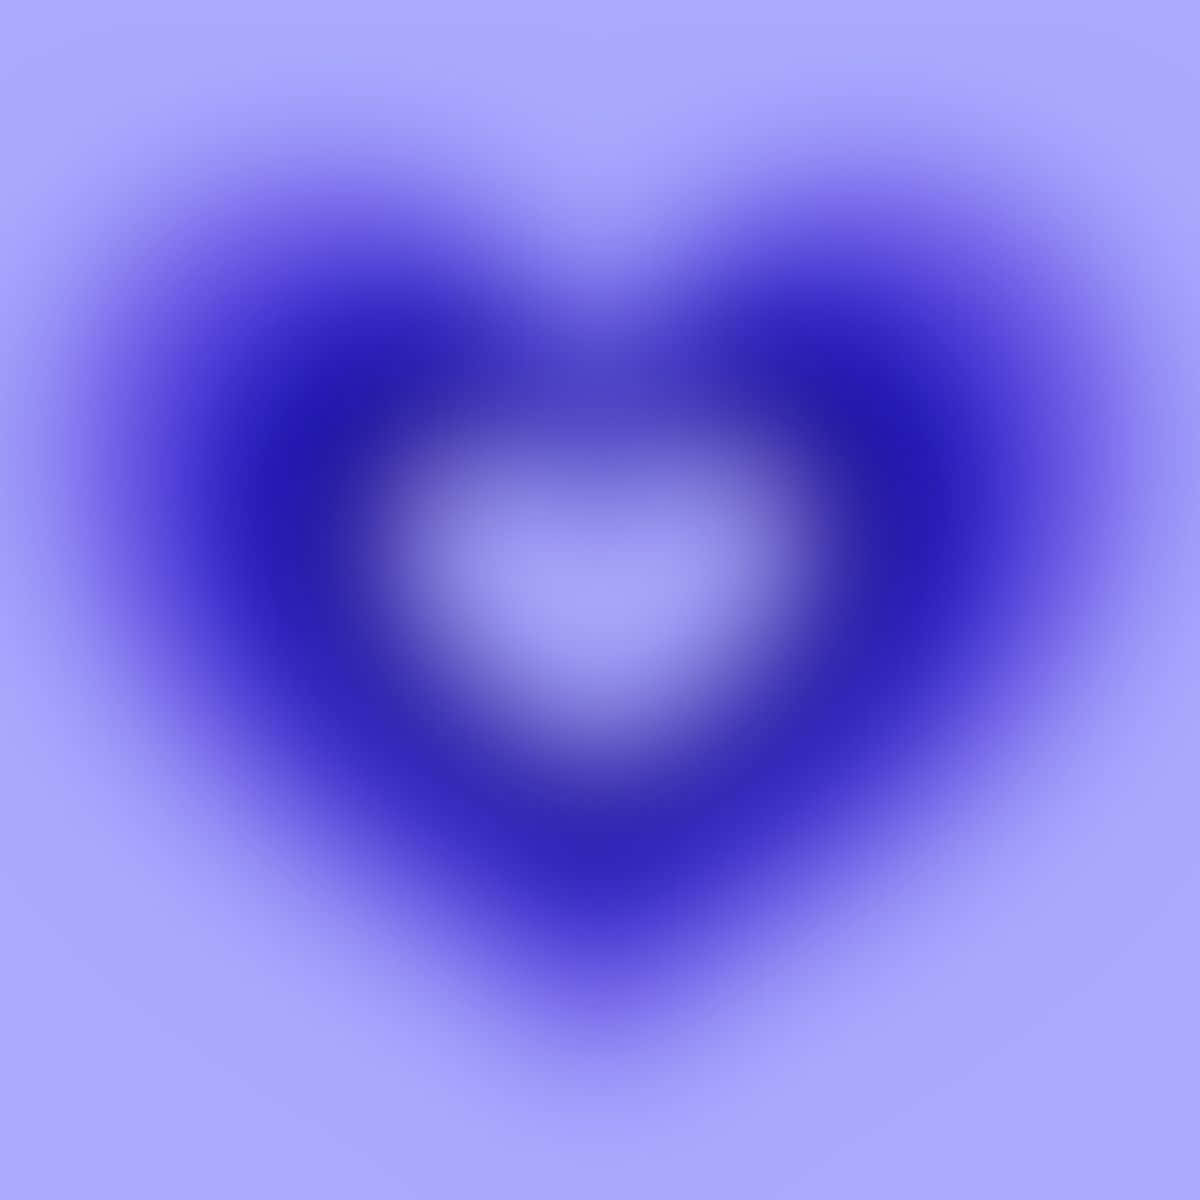 A Blurred Heart Shaped Image On A Purple Background Wallpaper